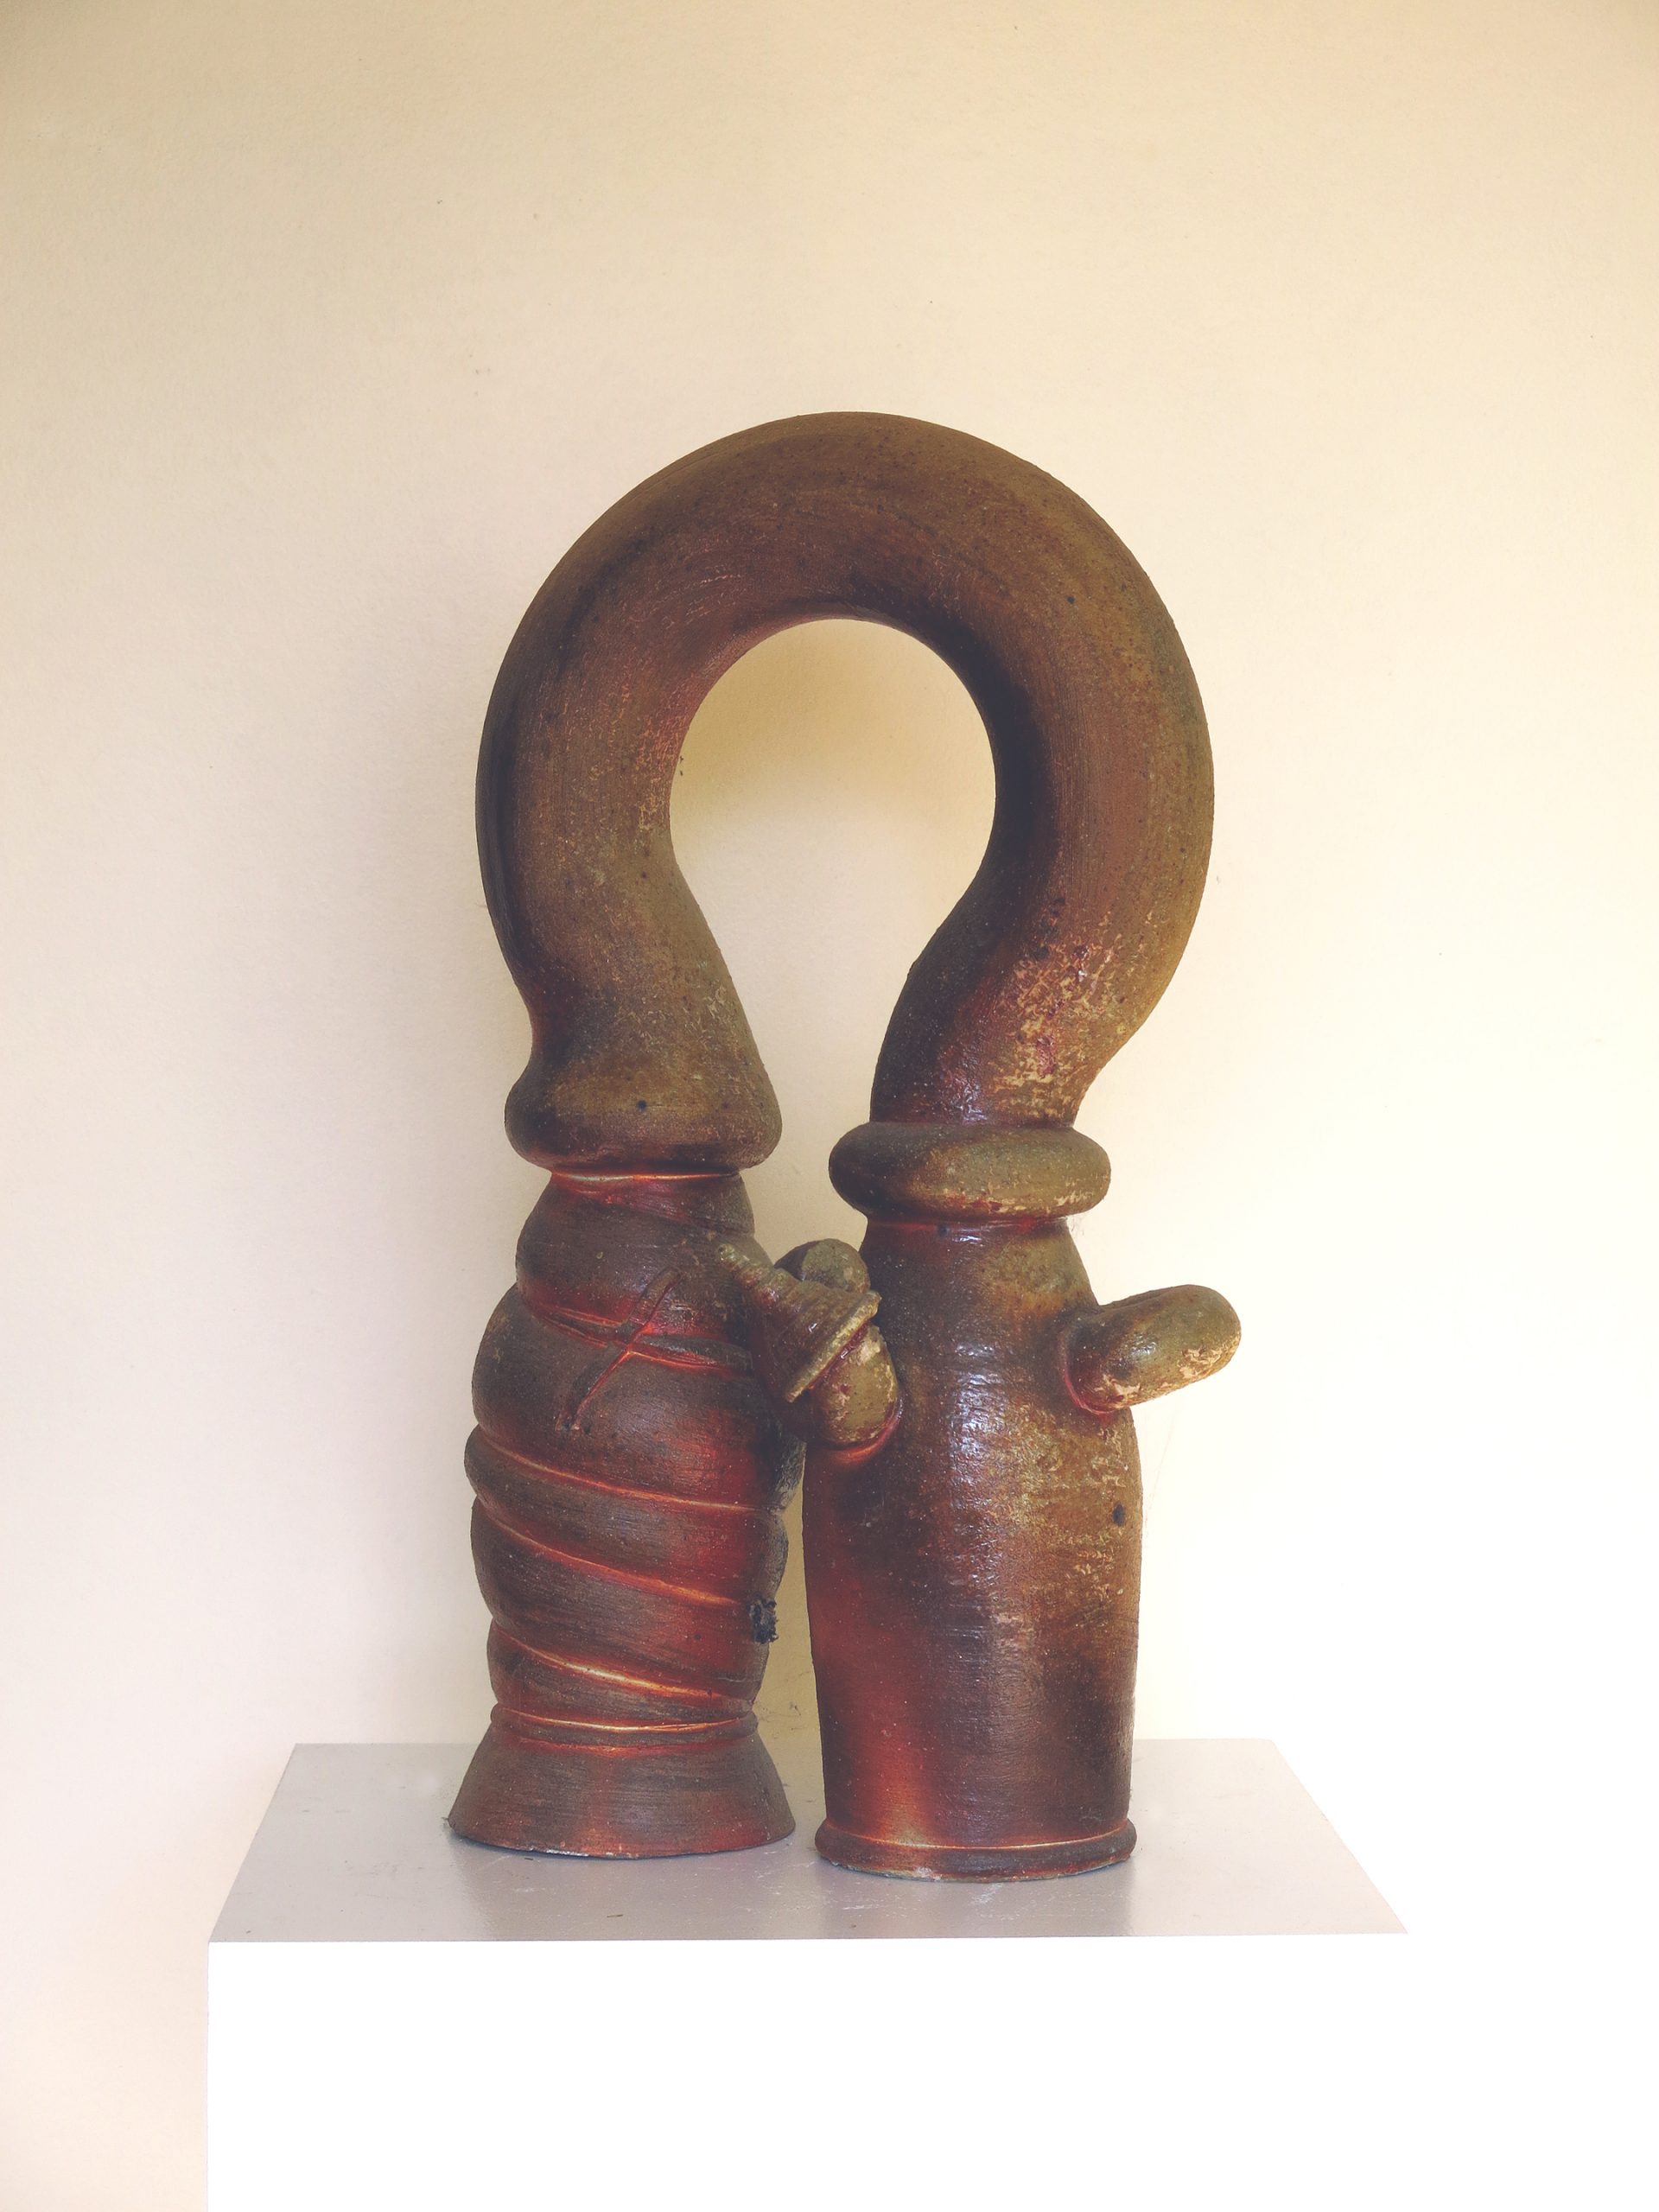 Bill Farrell, Shaman, 2010, Wood-fired stoneware, 24 x 13 x 7 inches, Courtesy of the artist's estate